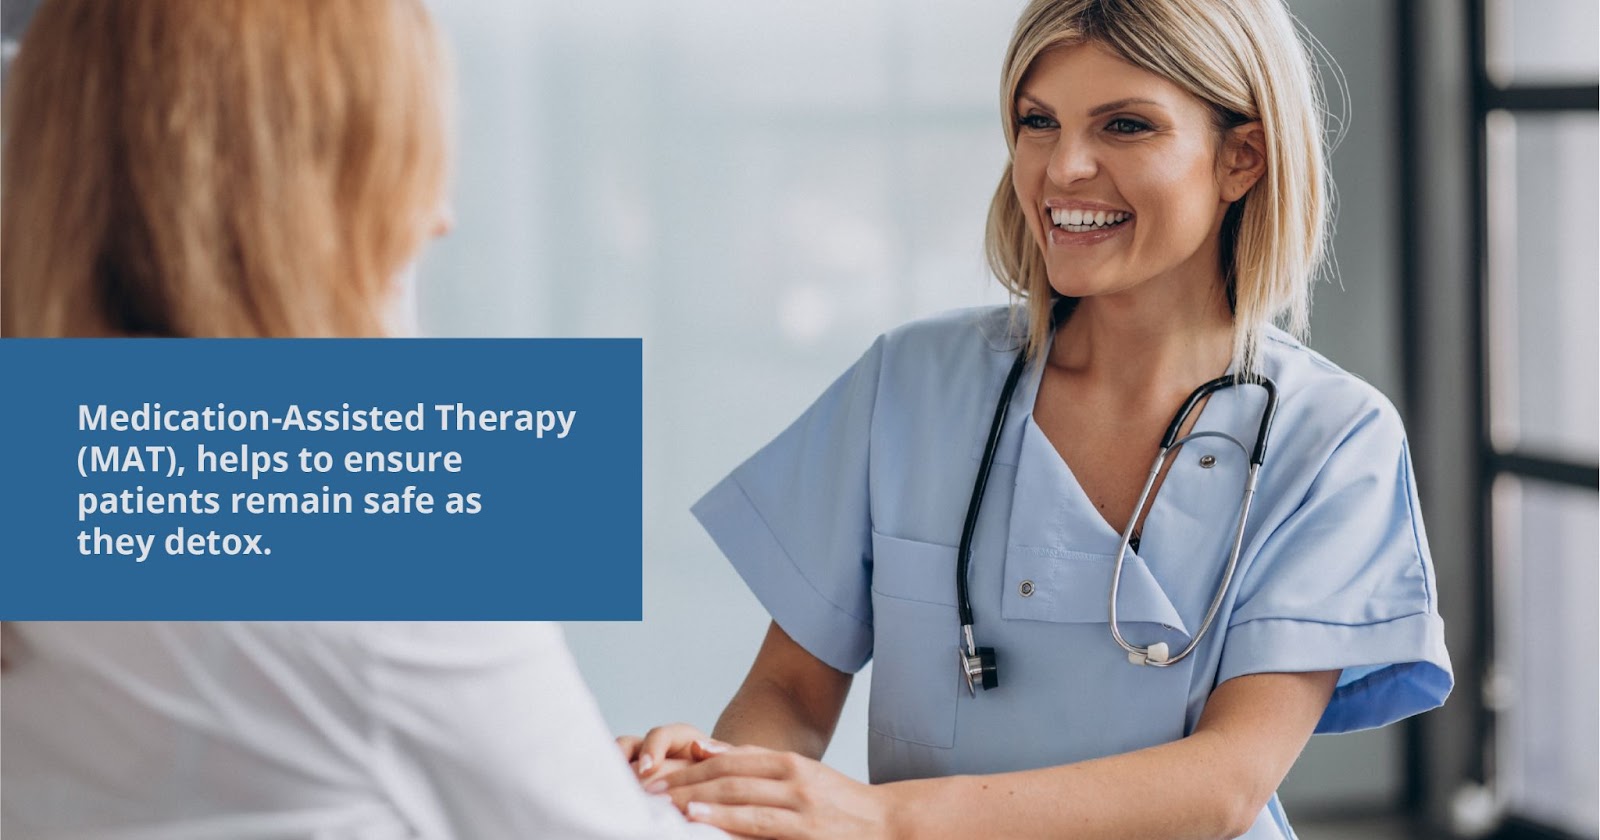 Medication assisted therapy helps to ensure patients remain safe as they detox